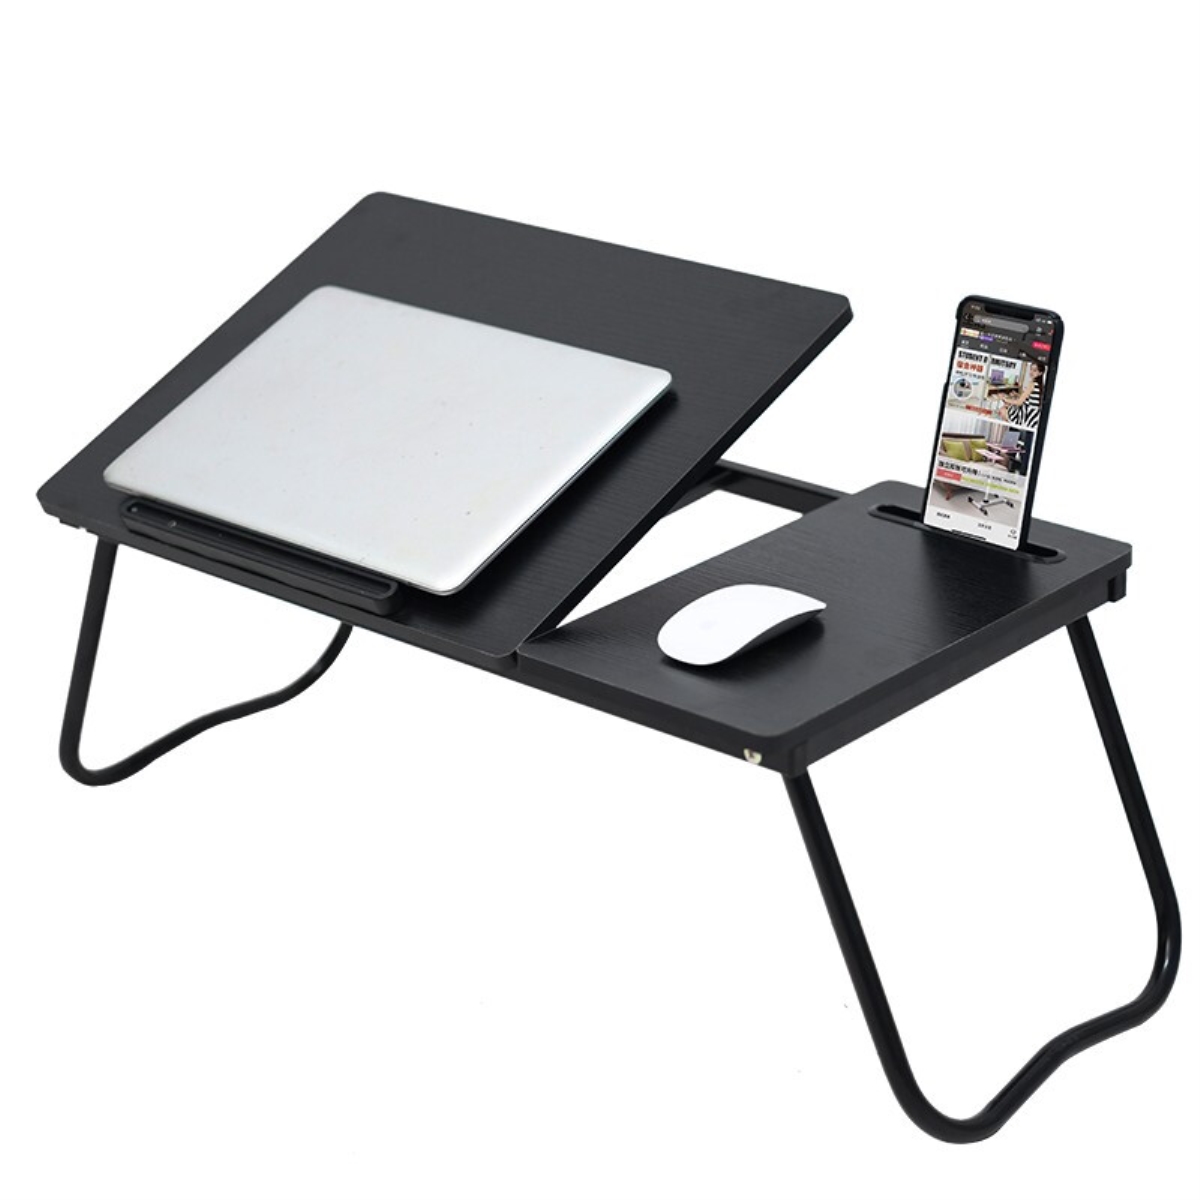 Foldable-Bed-Tray-26-inches-Laptop-Desk-Adjustable-Bed-Table-with-Storage-Slots-Tablet-Phone-Holder--1630418-1